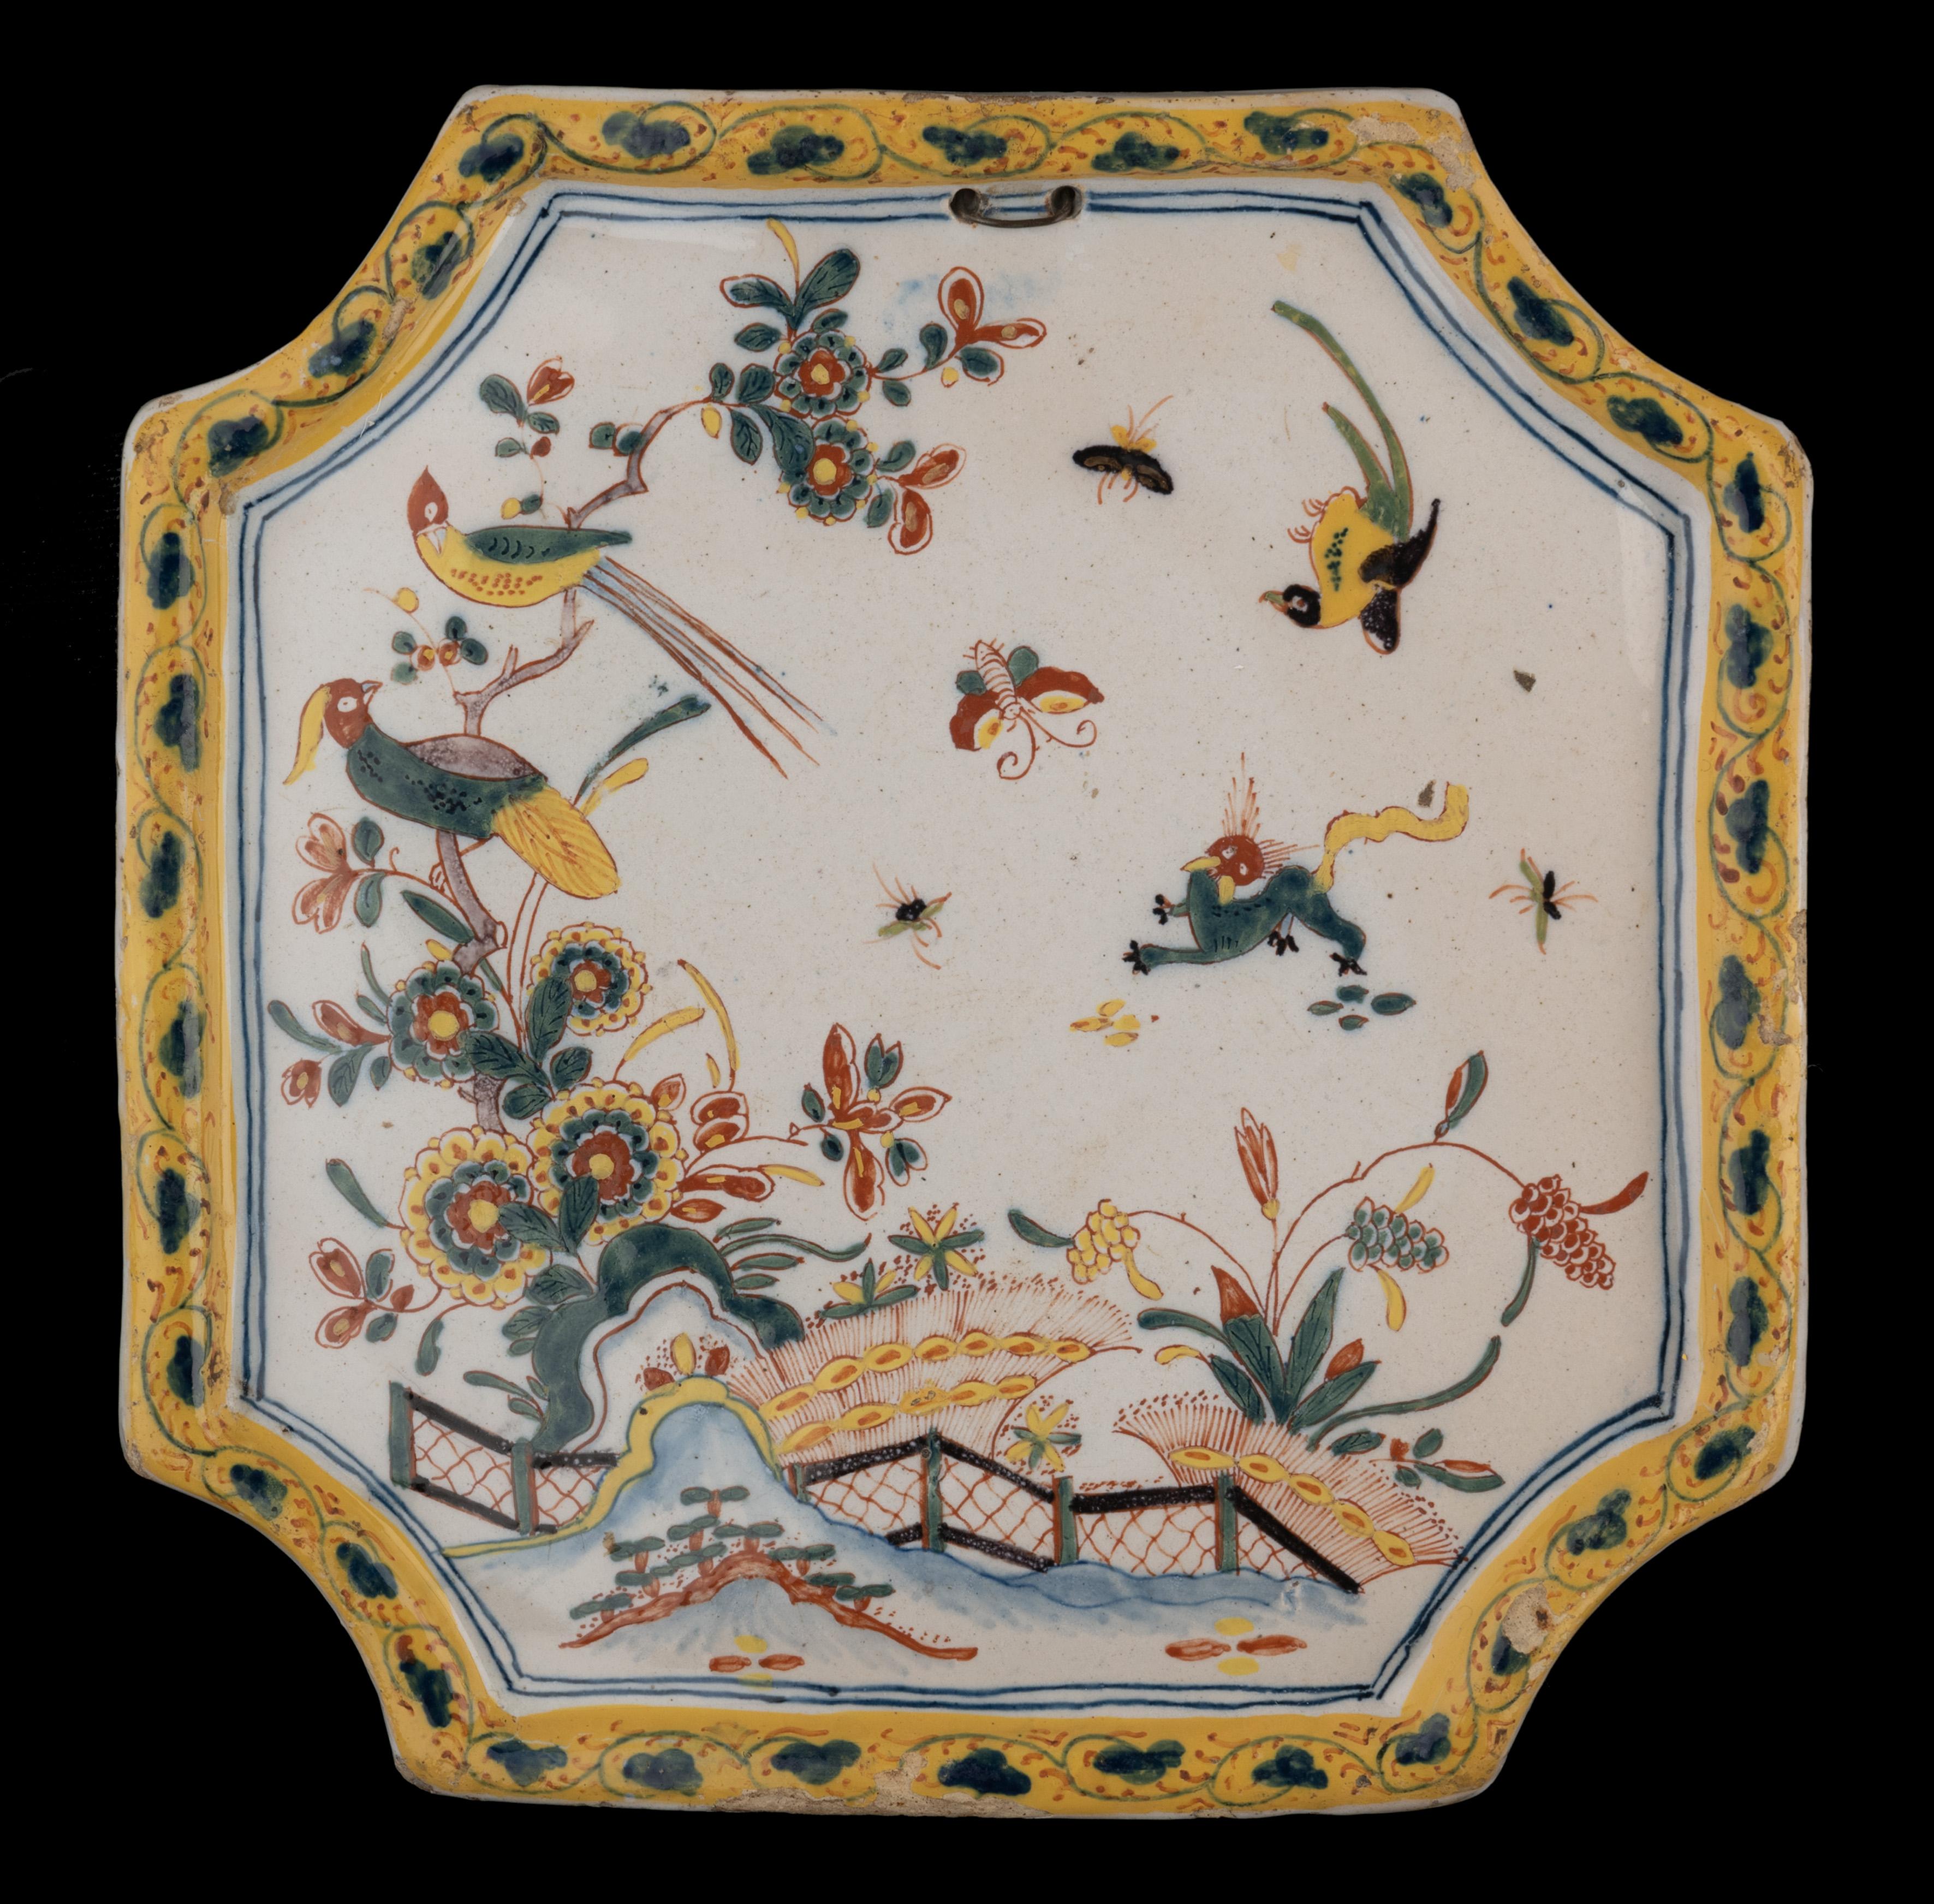 Polychrome plaque with oriental floral decoration Delft, 1740-1760

The square, convex plaque has indented corners and a raised rim and is painted in polychrome with an oriental floral landscape. A fence is set on a rocky ground with vegetation. On